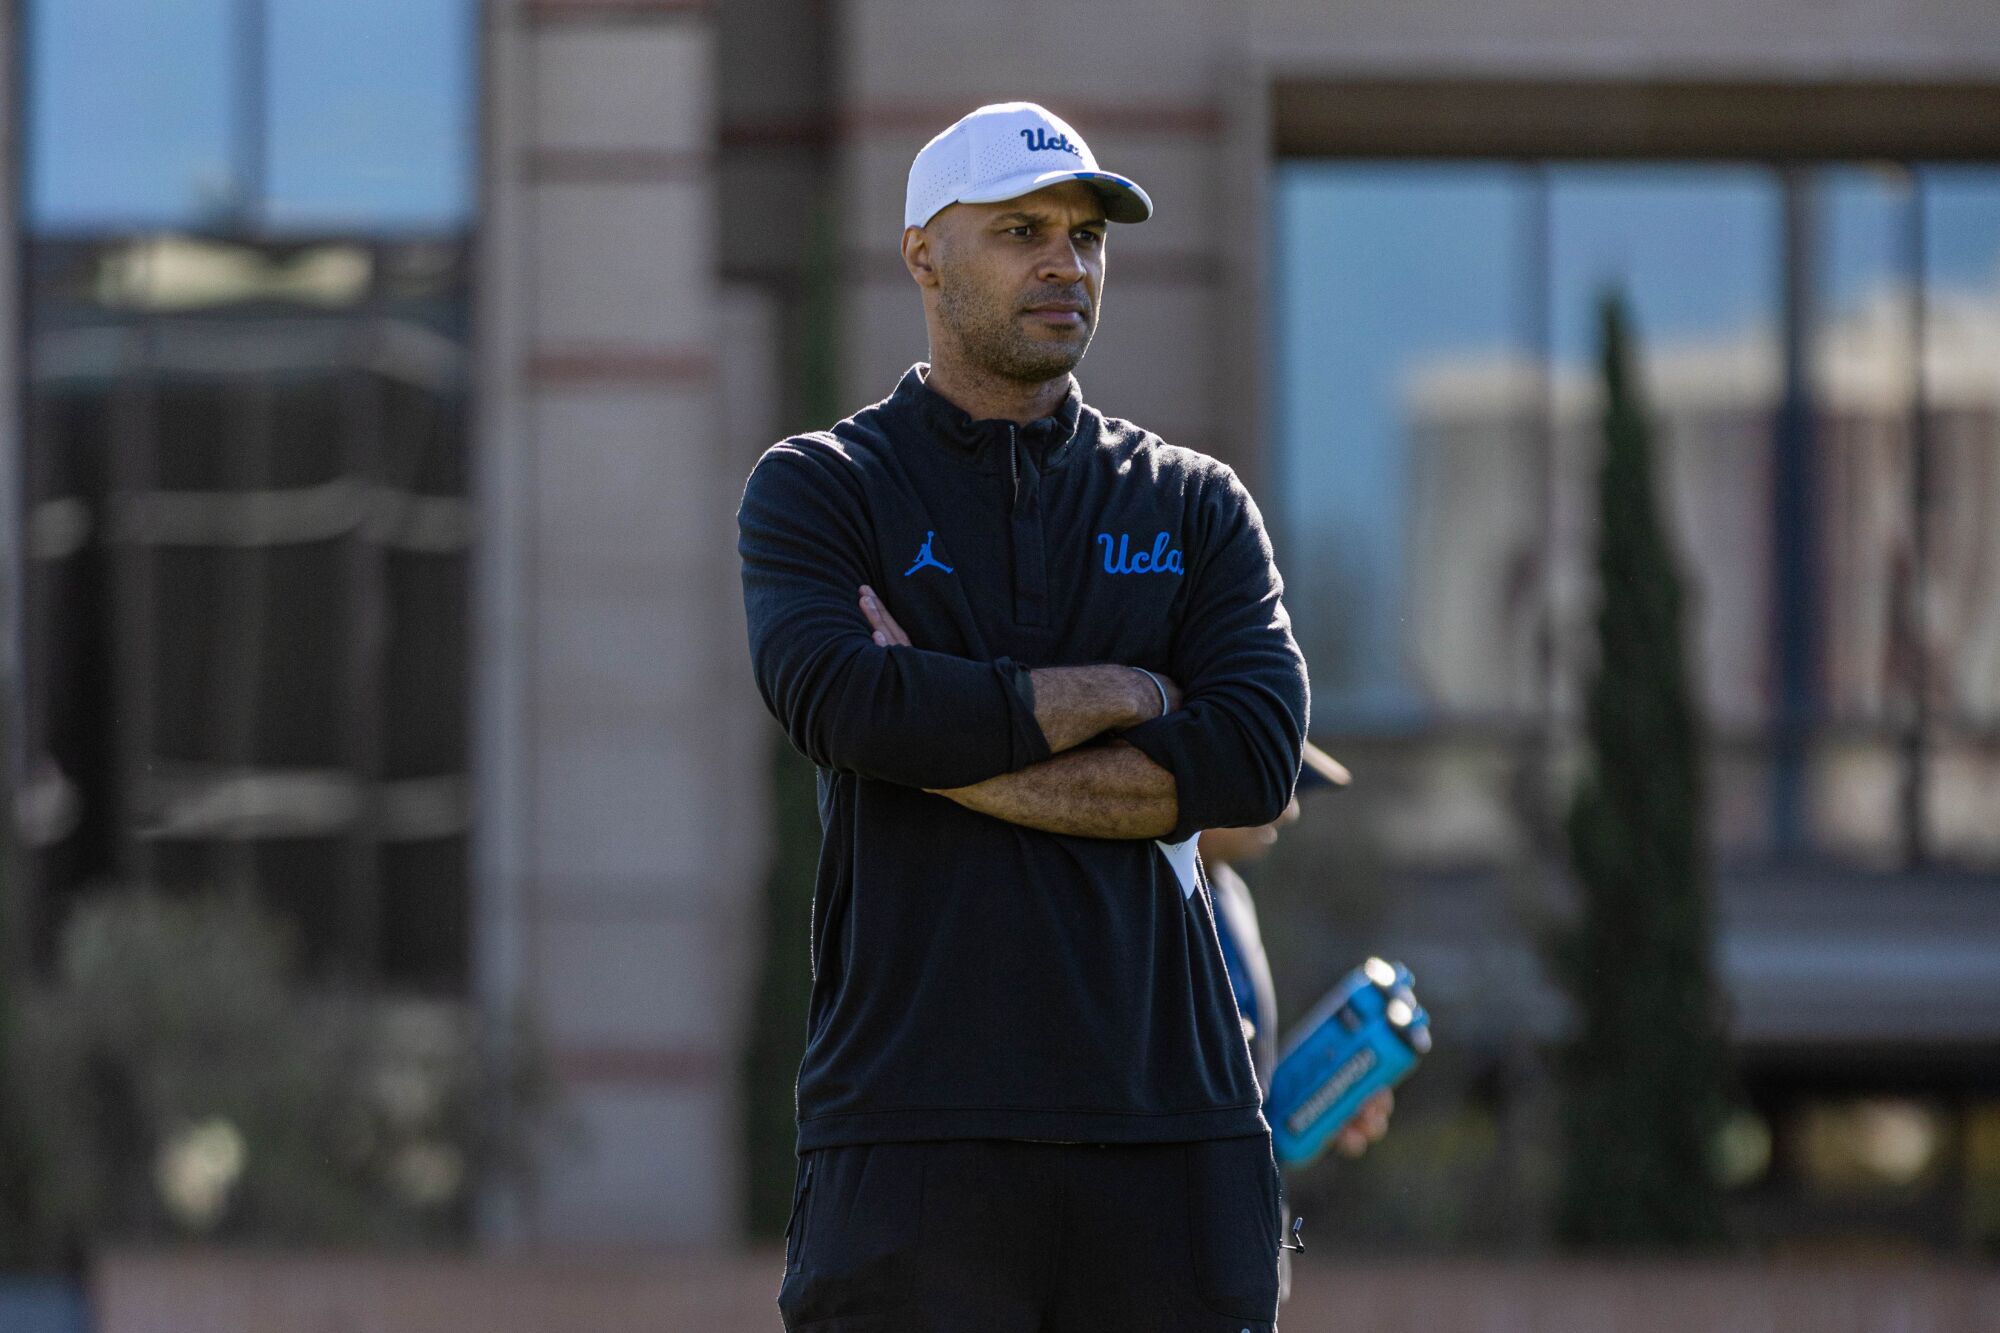 UCLA defensive coordinator D'Anton Lynn watches players during a spring practice session in April.